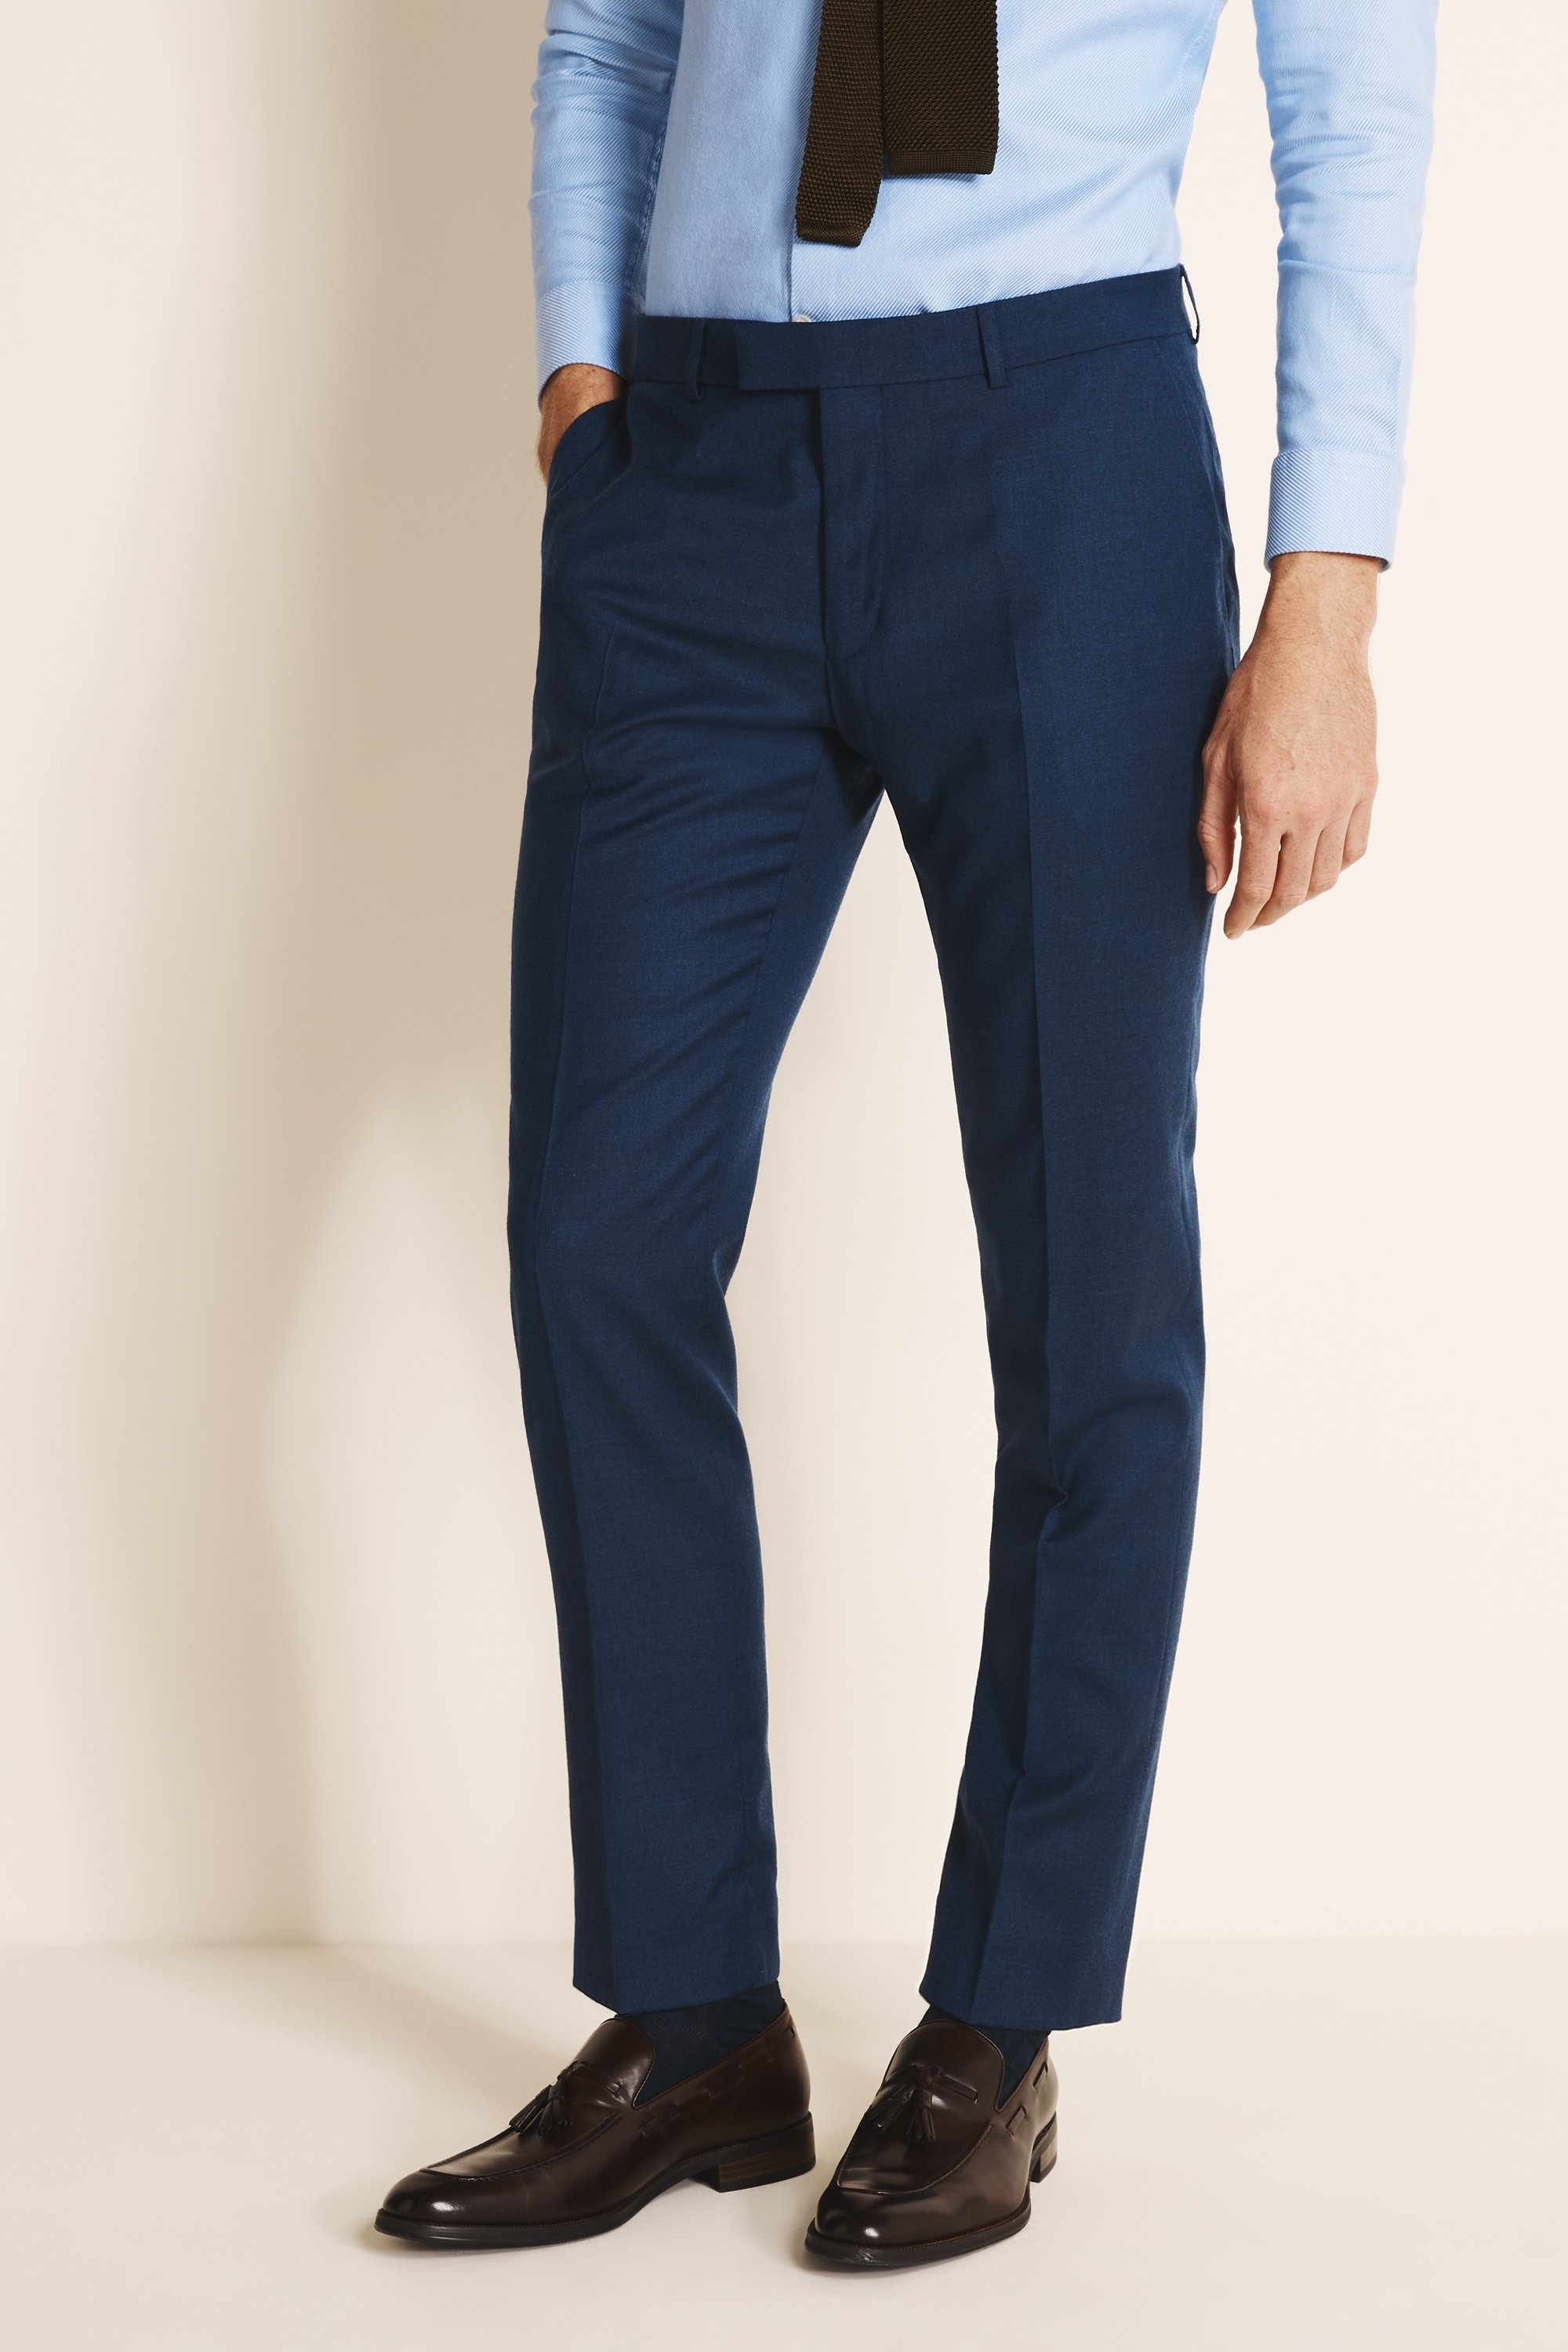 Buy Olney Navy Flannel Trousers for 7900  Free Returns